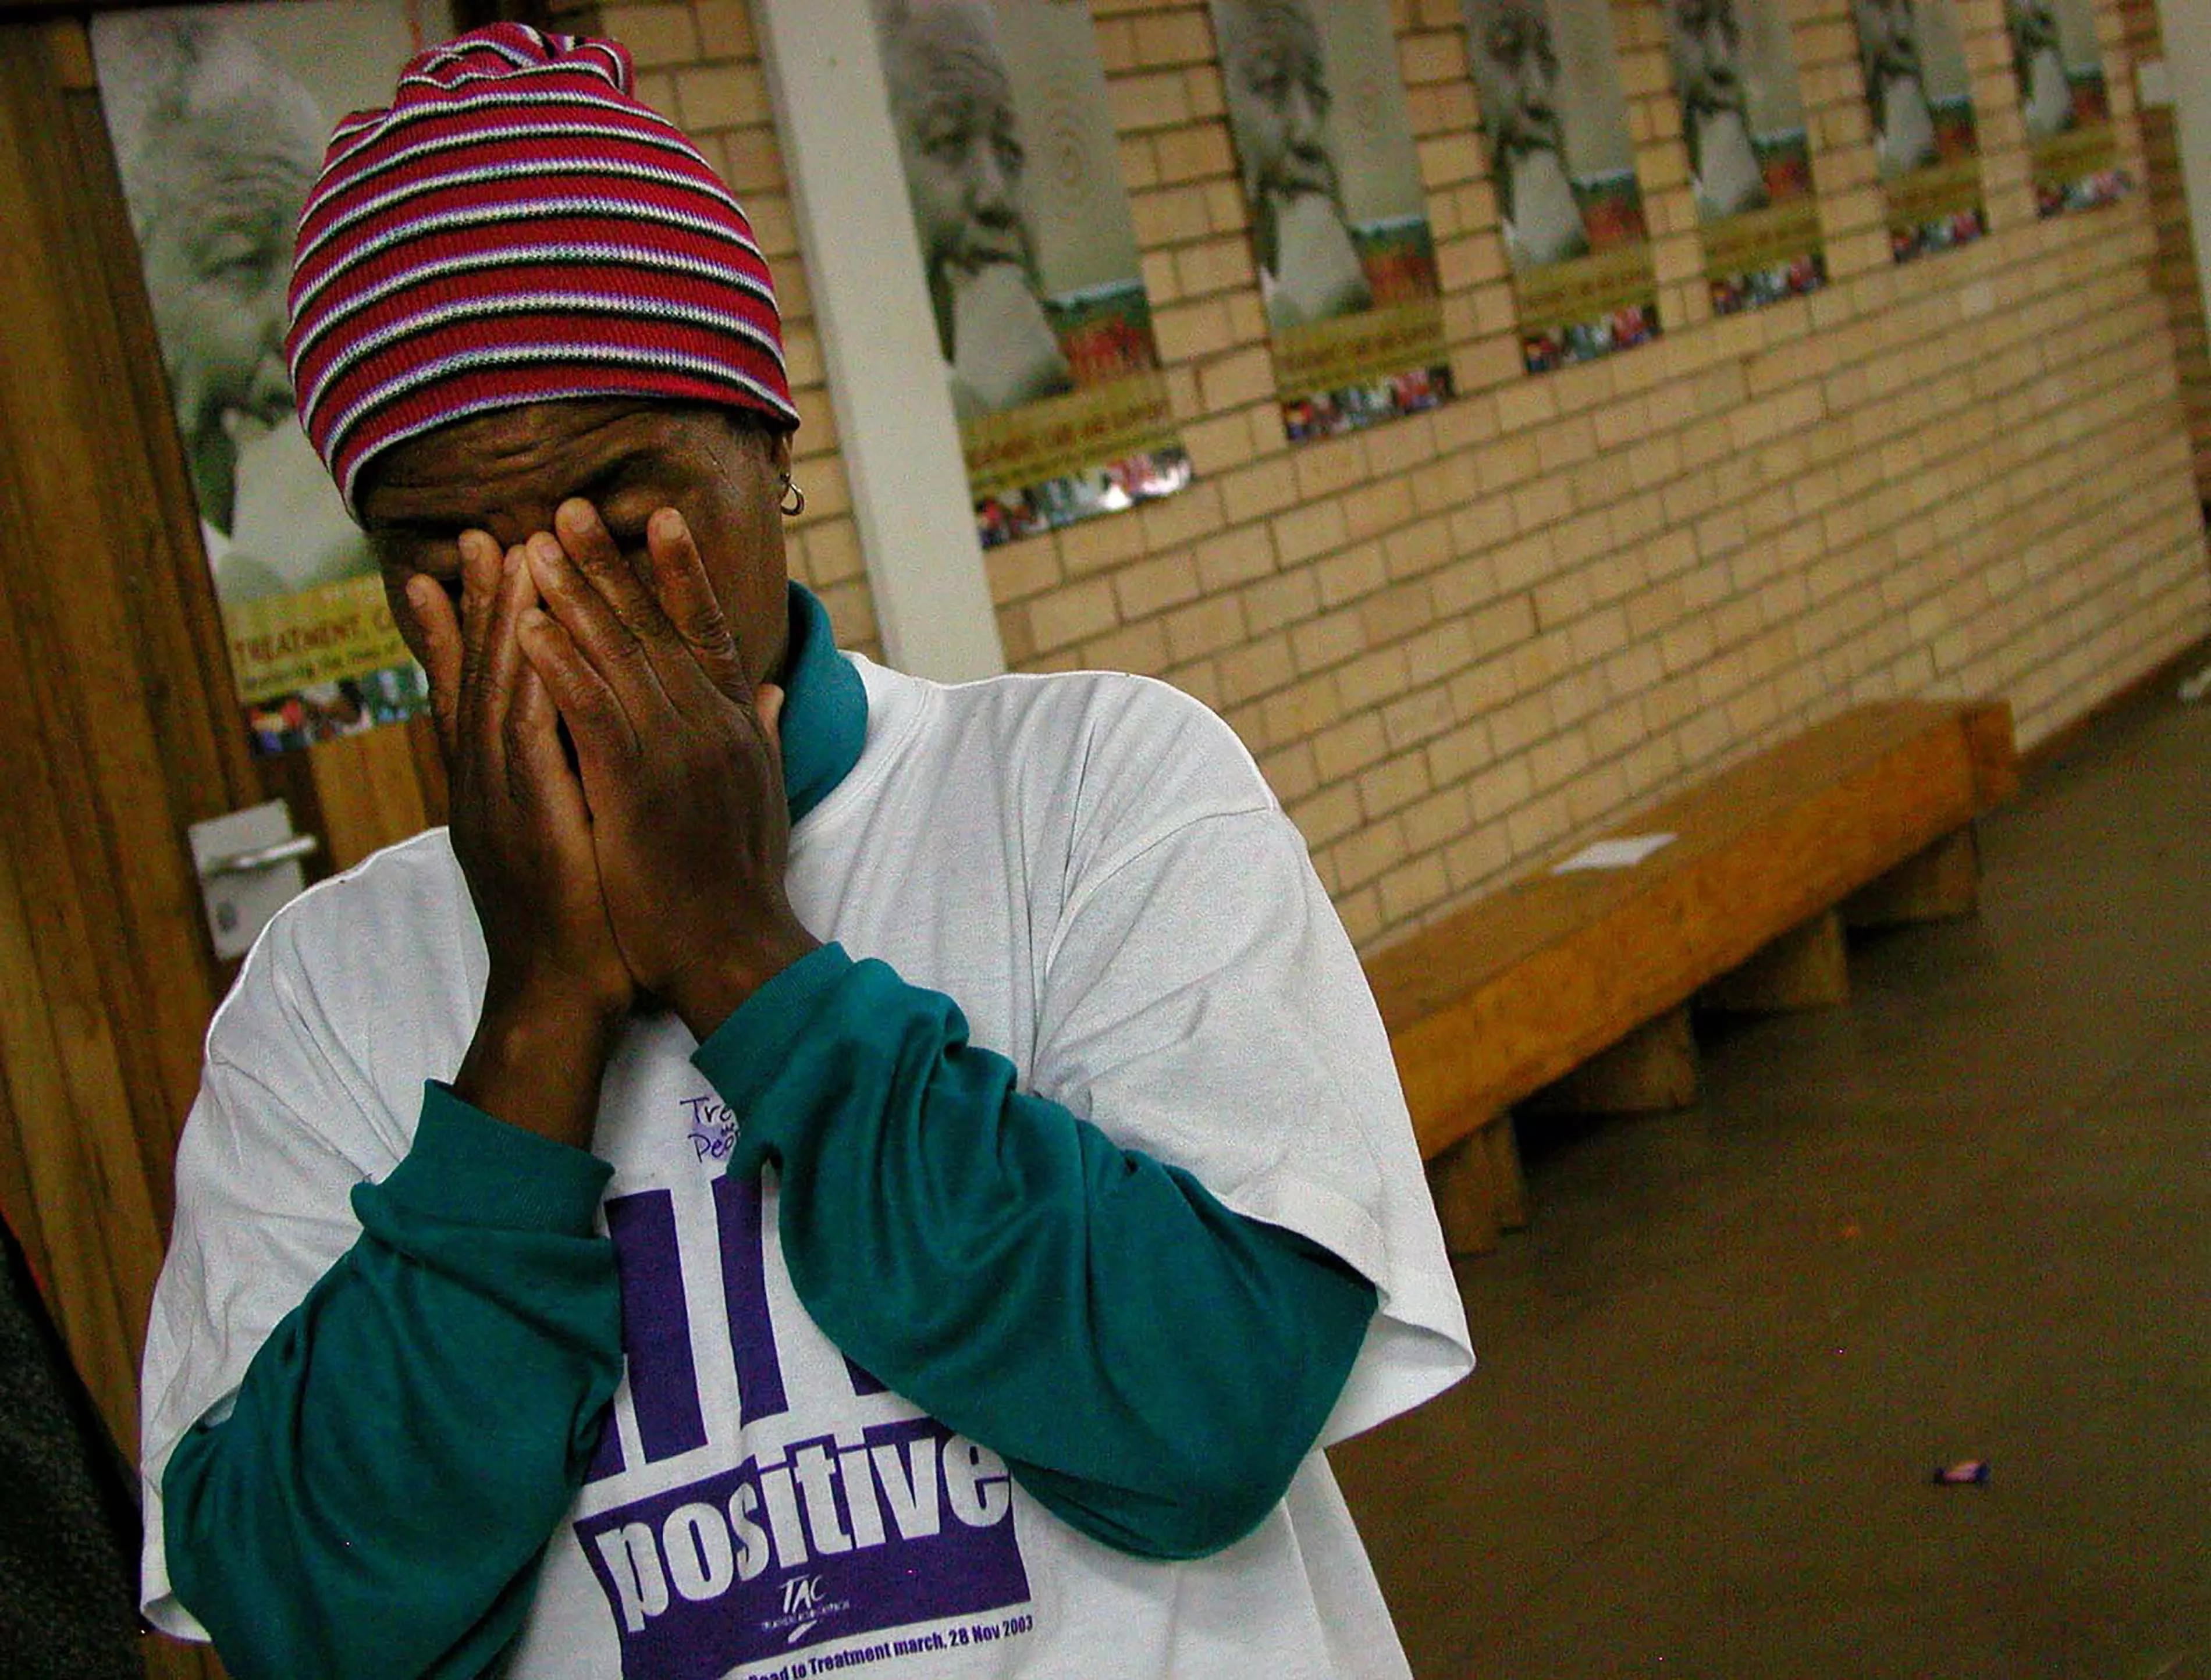 A woman wearing an "HIV Positive" t-shirt closes her eyes for a prayer during Mr Mandela's visit to Siyaphila la HIV Treatment Program hosted by MSF and the Nelson Mandela Foundation. The event was held at the Lusikiki Teacher's Training College.